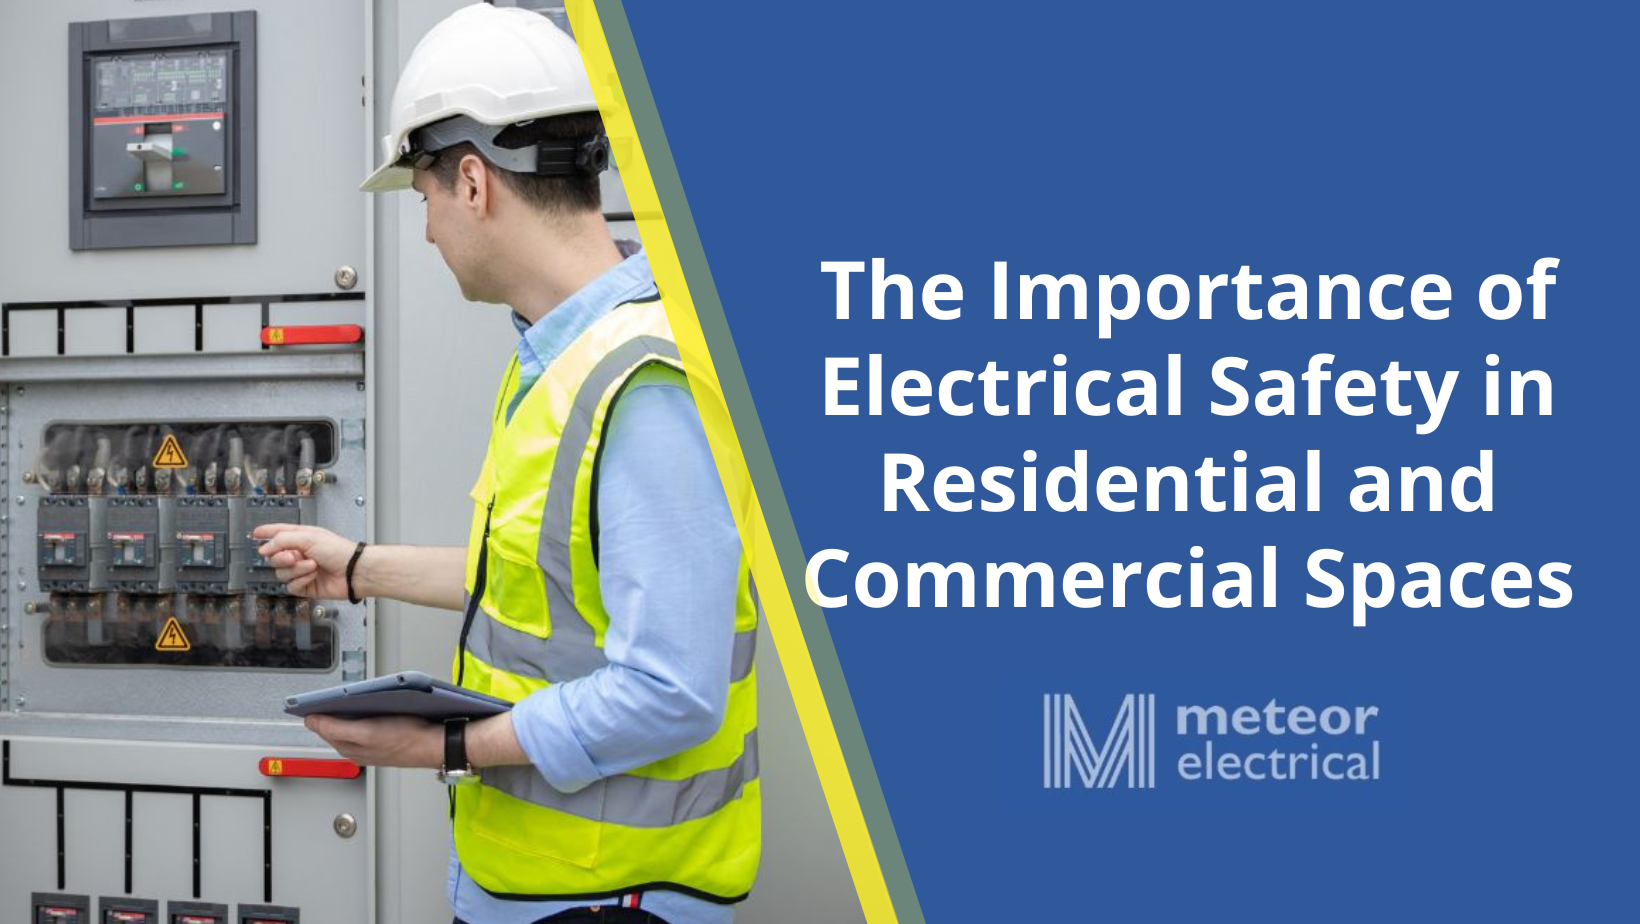 The Importance of Electrical Safety in Residential and Commercial Spaces